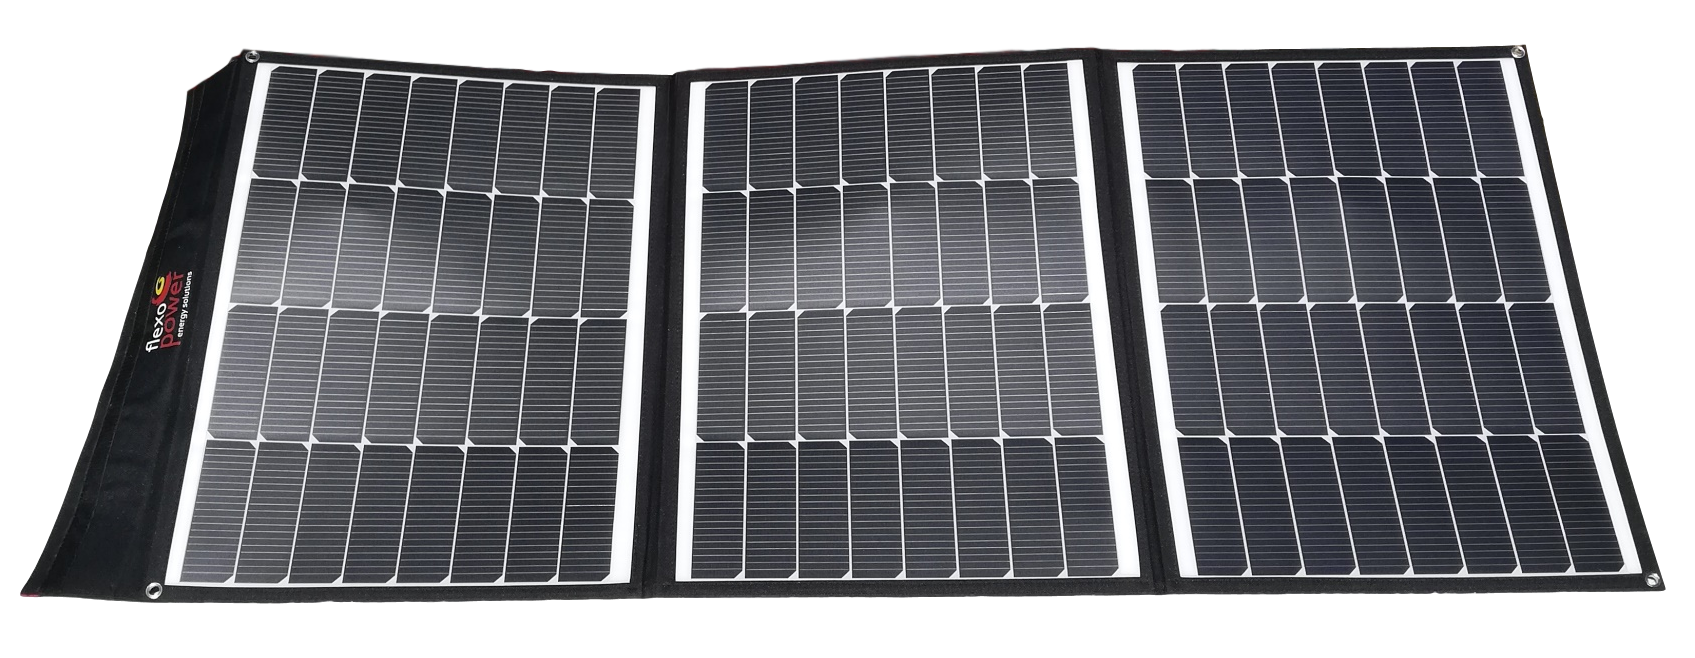 The new Mojave-150W foldable solar panel by Flexopower